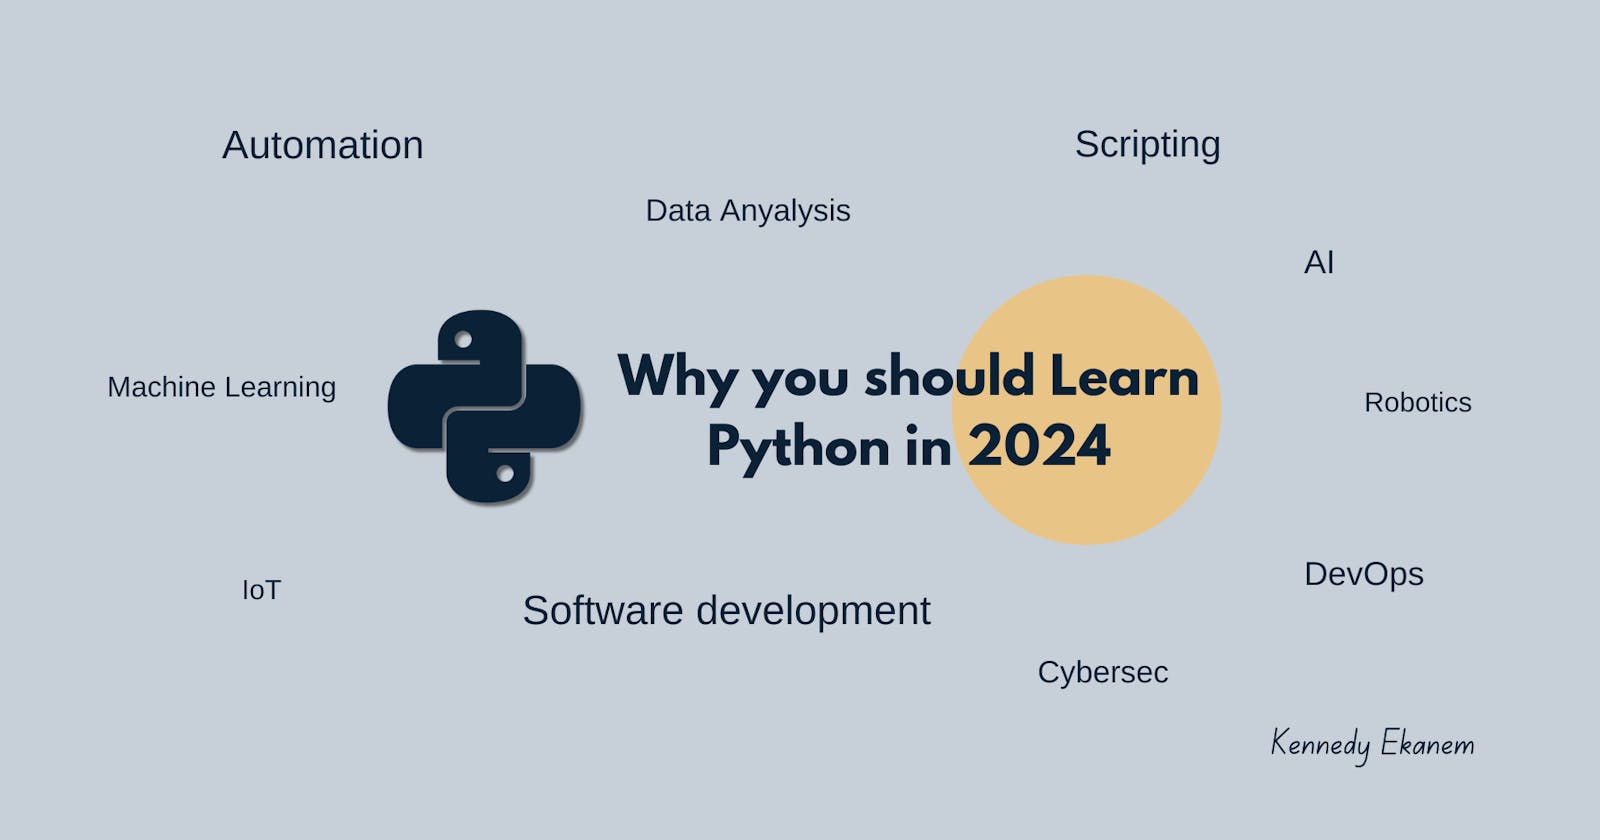 Why you should Learn Python in 2024